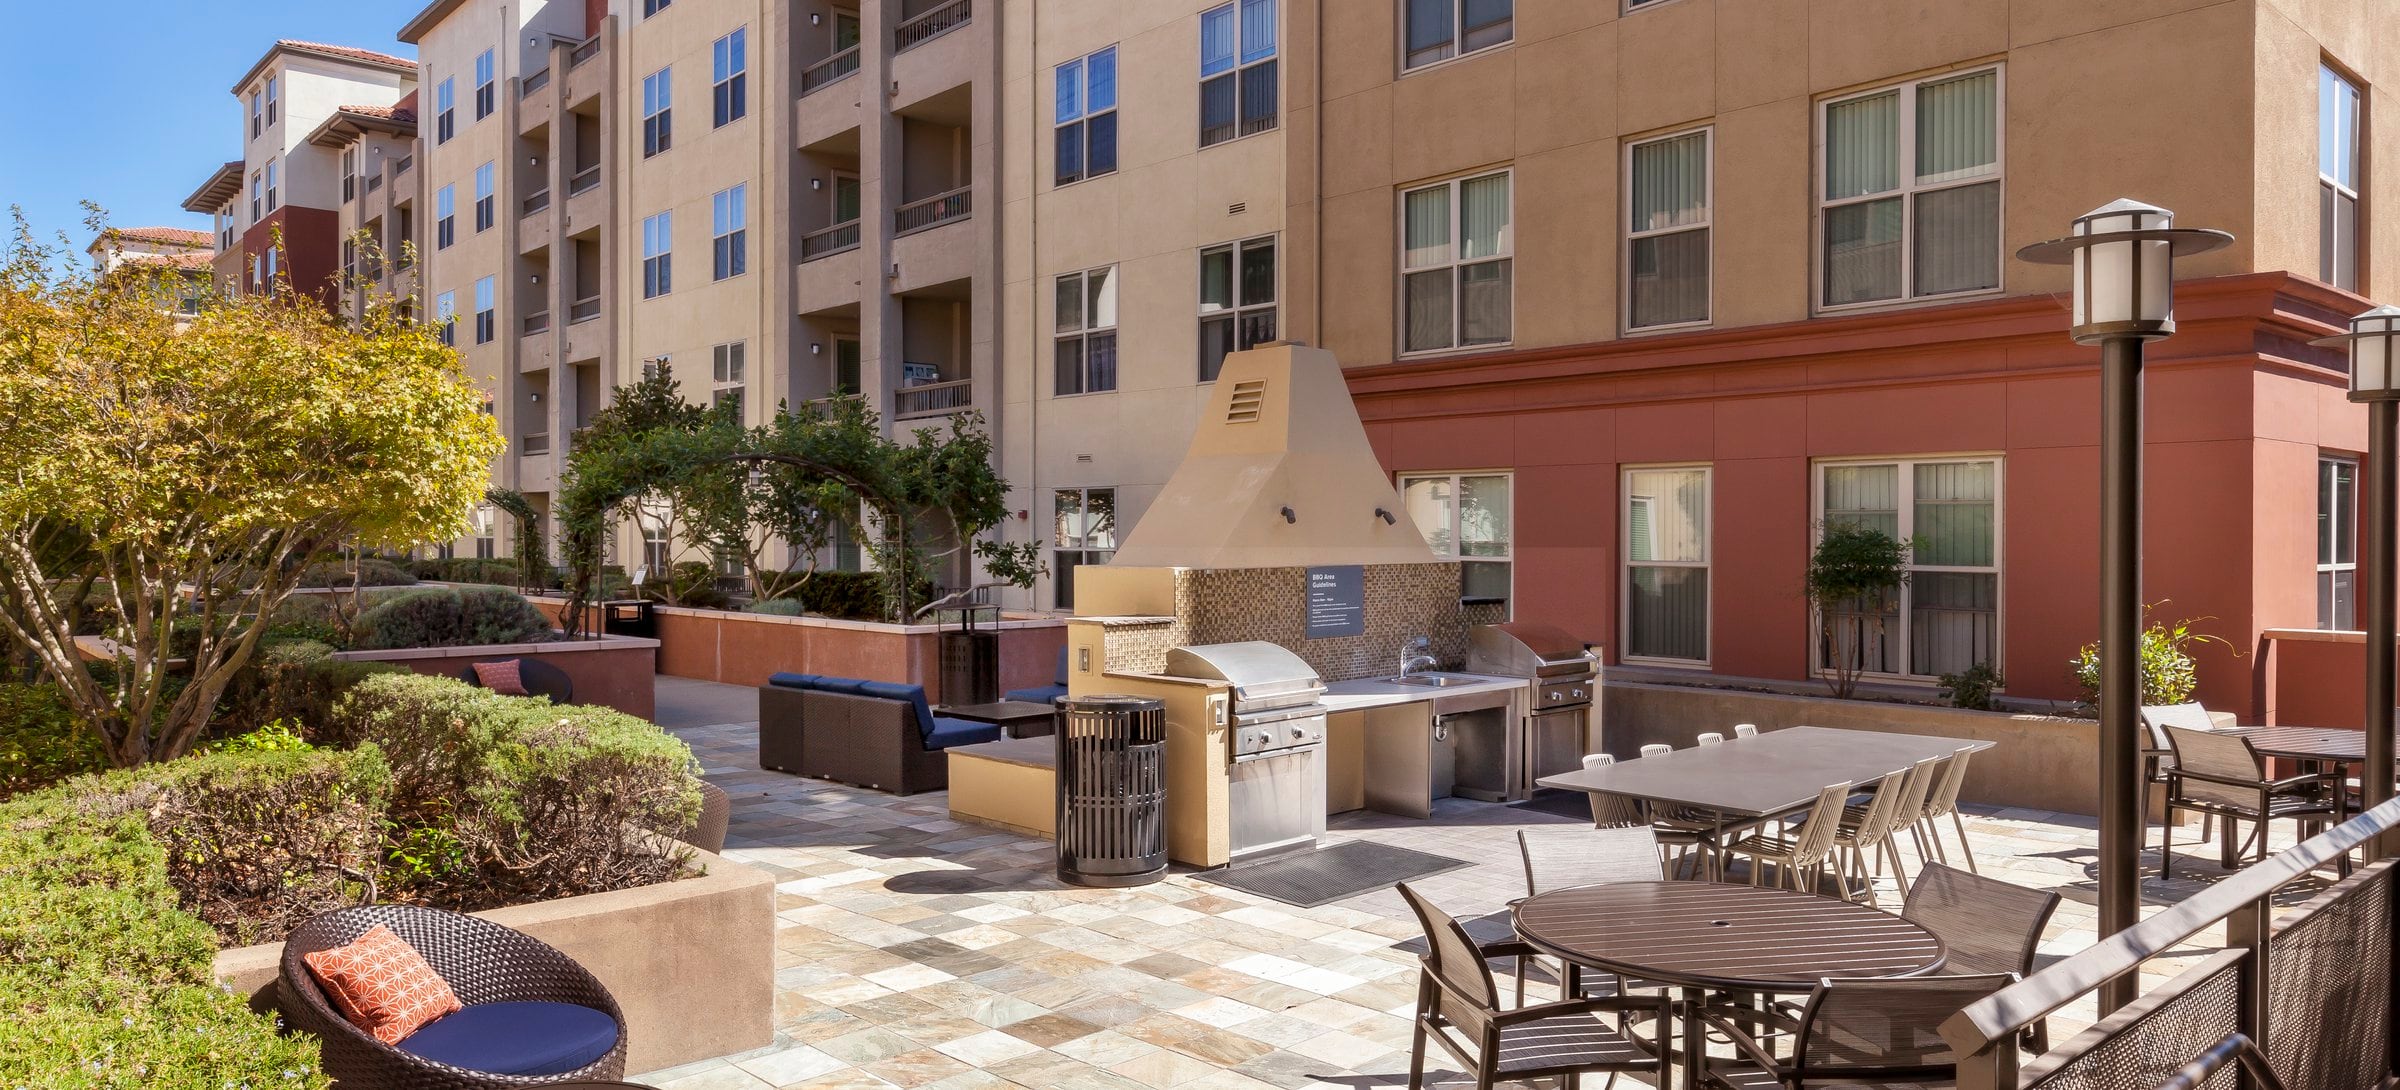 Phase I Courtyard with Barbecue Grills and Dining Area